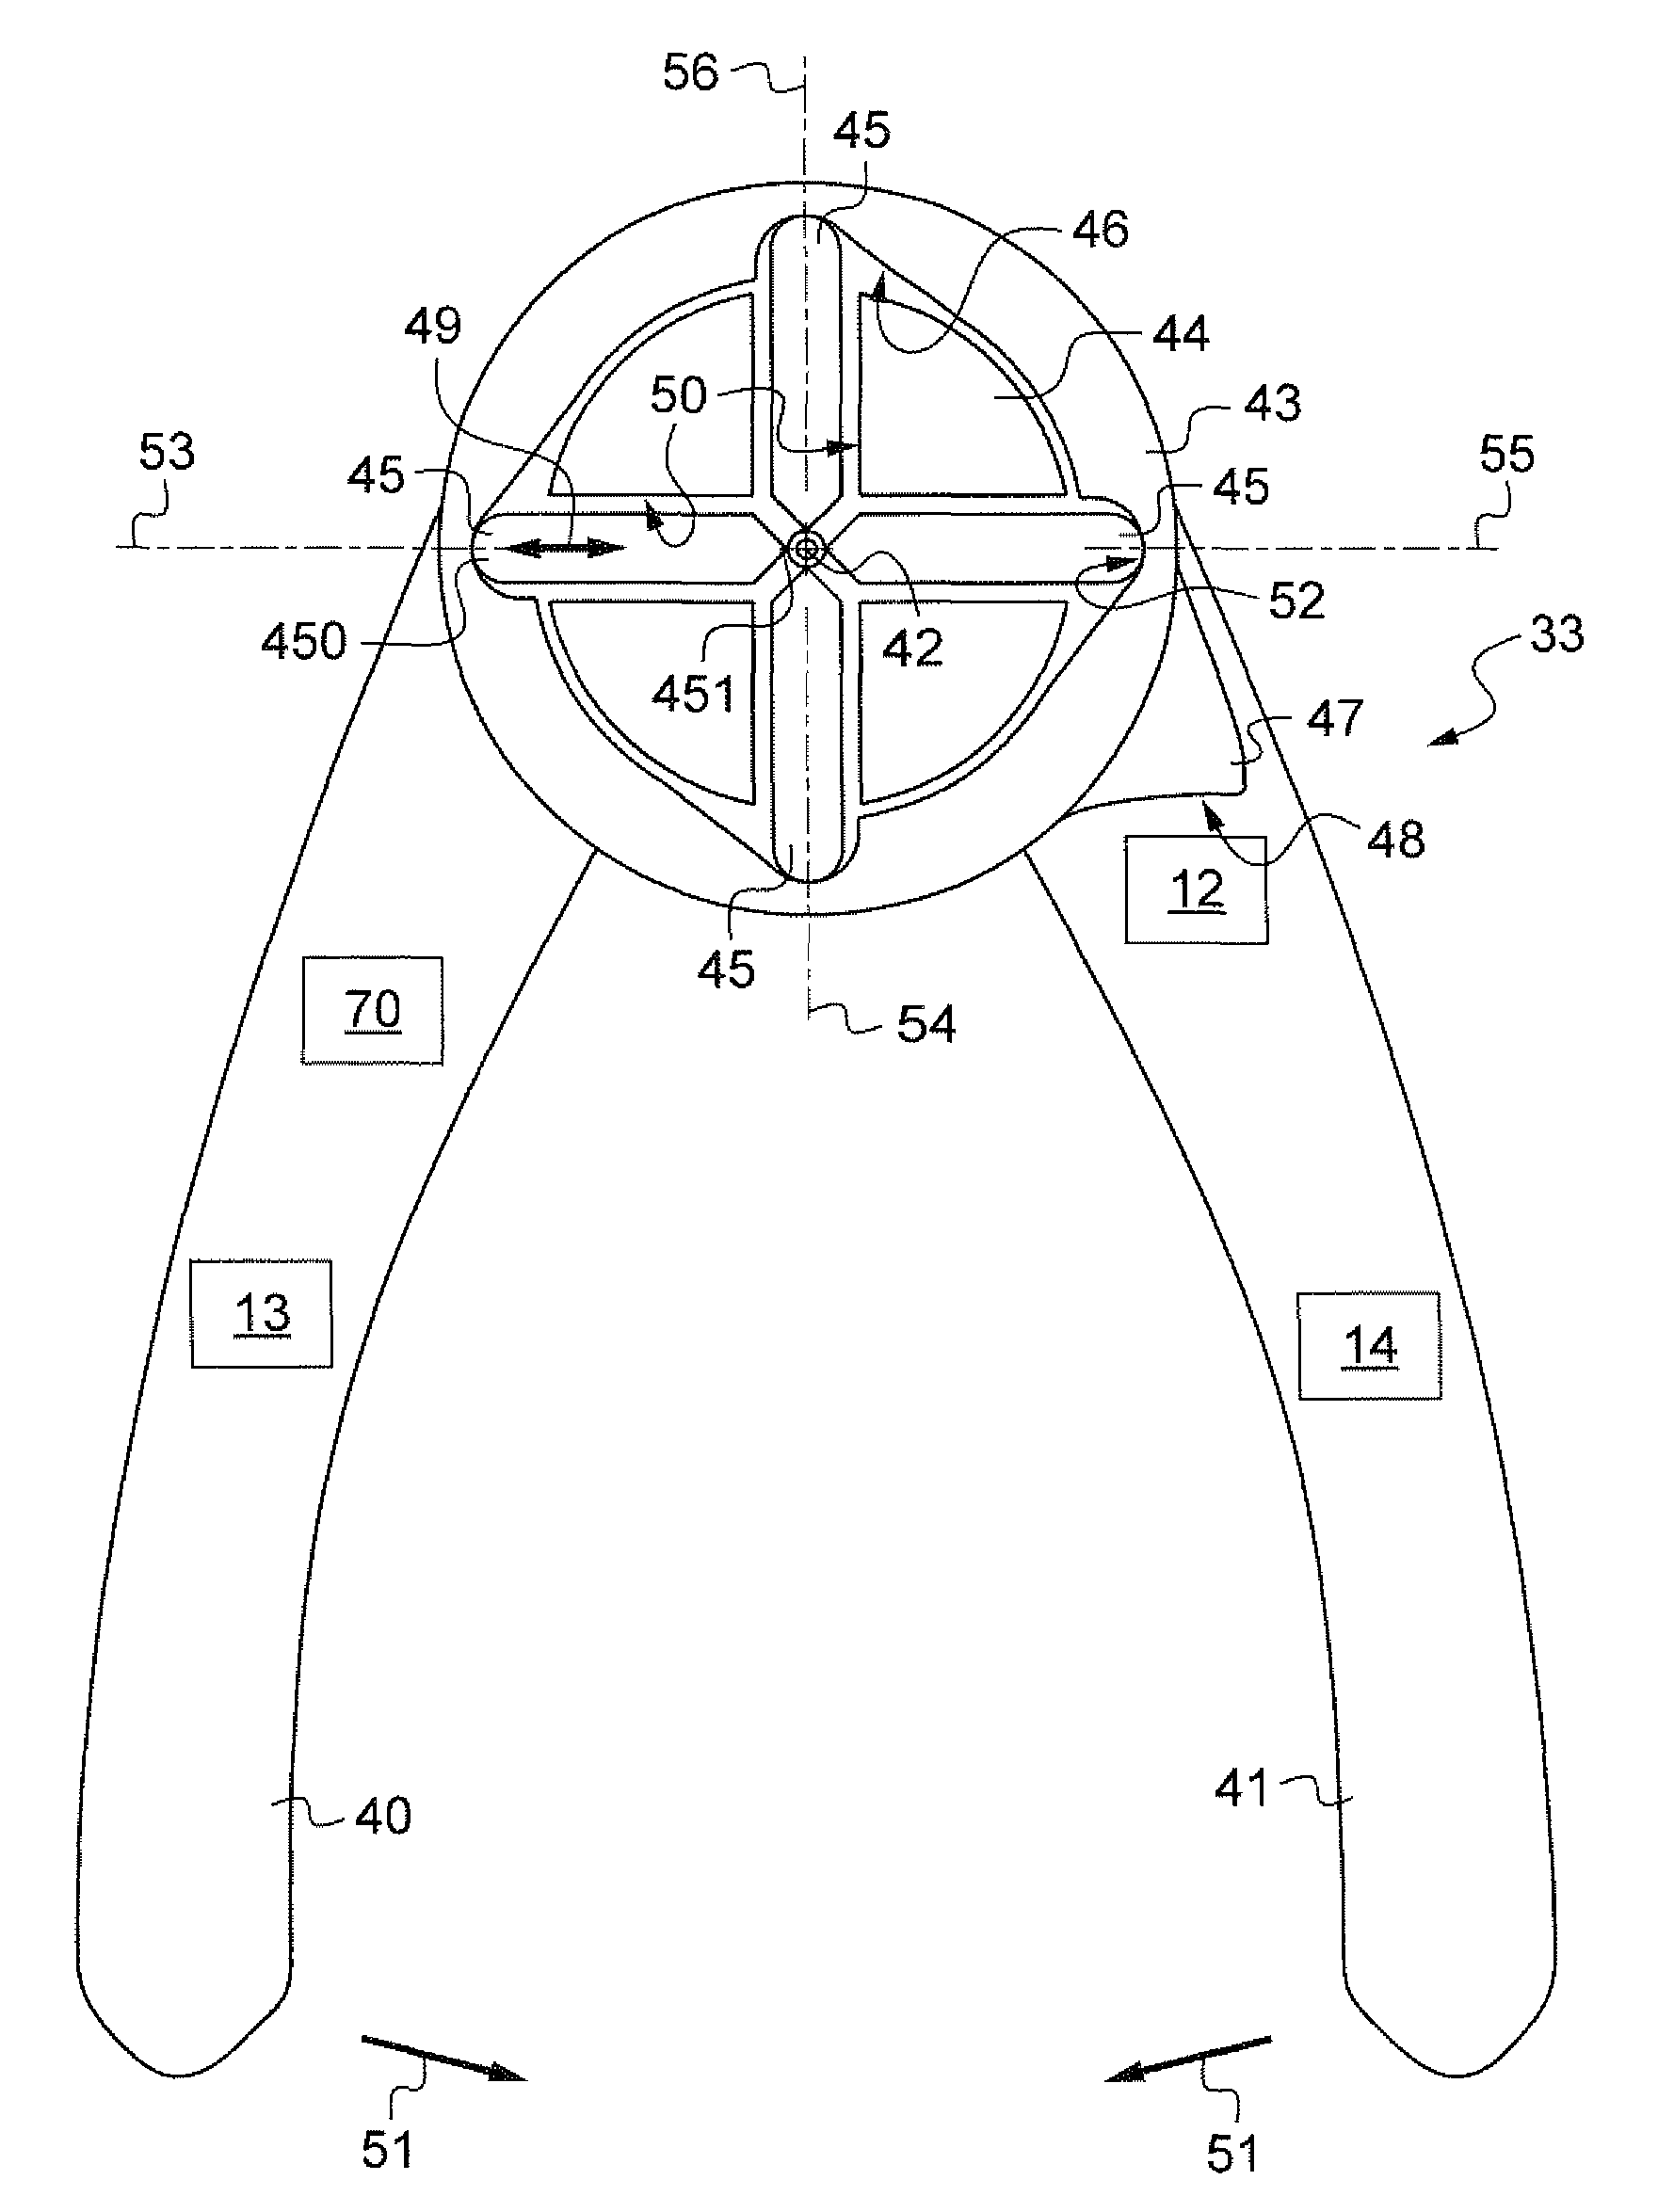 Crimping system with integrated monitoring